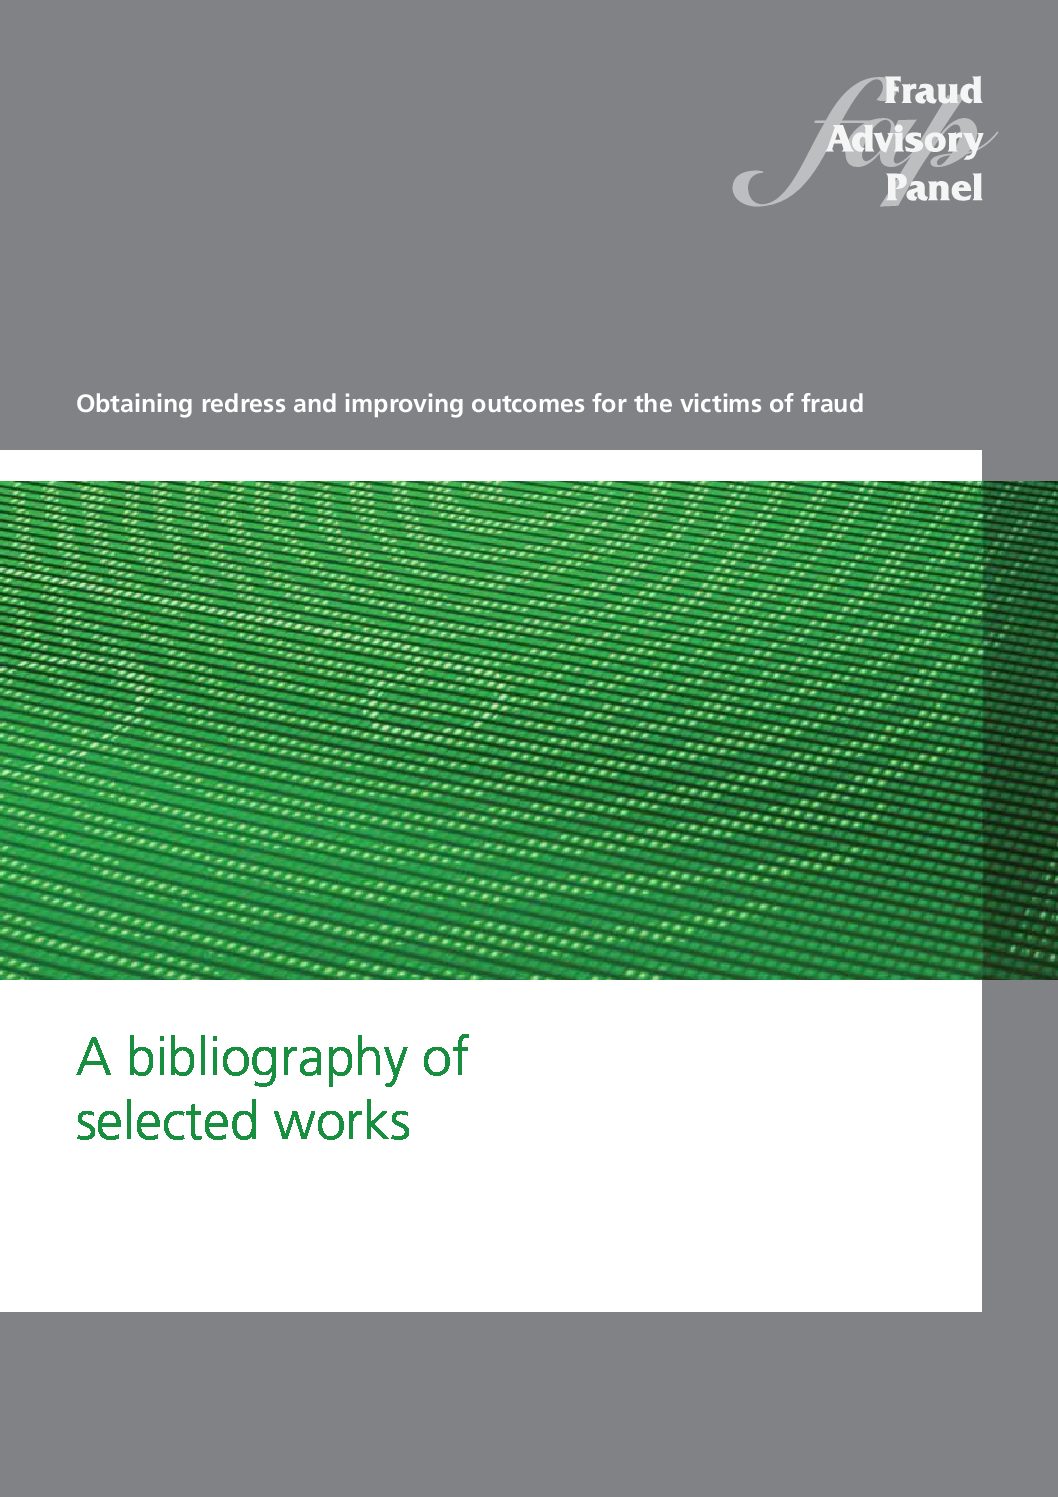 Bibliography of selected works 2012 document cover